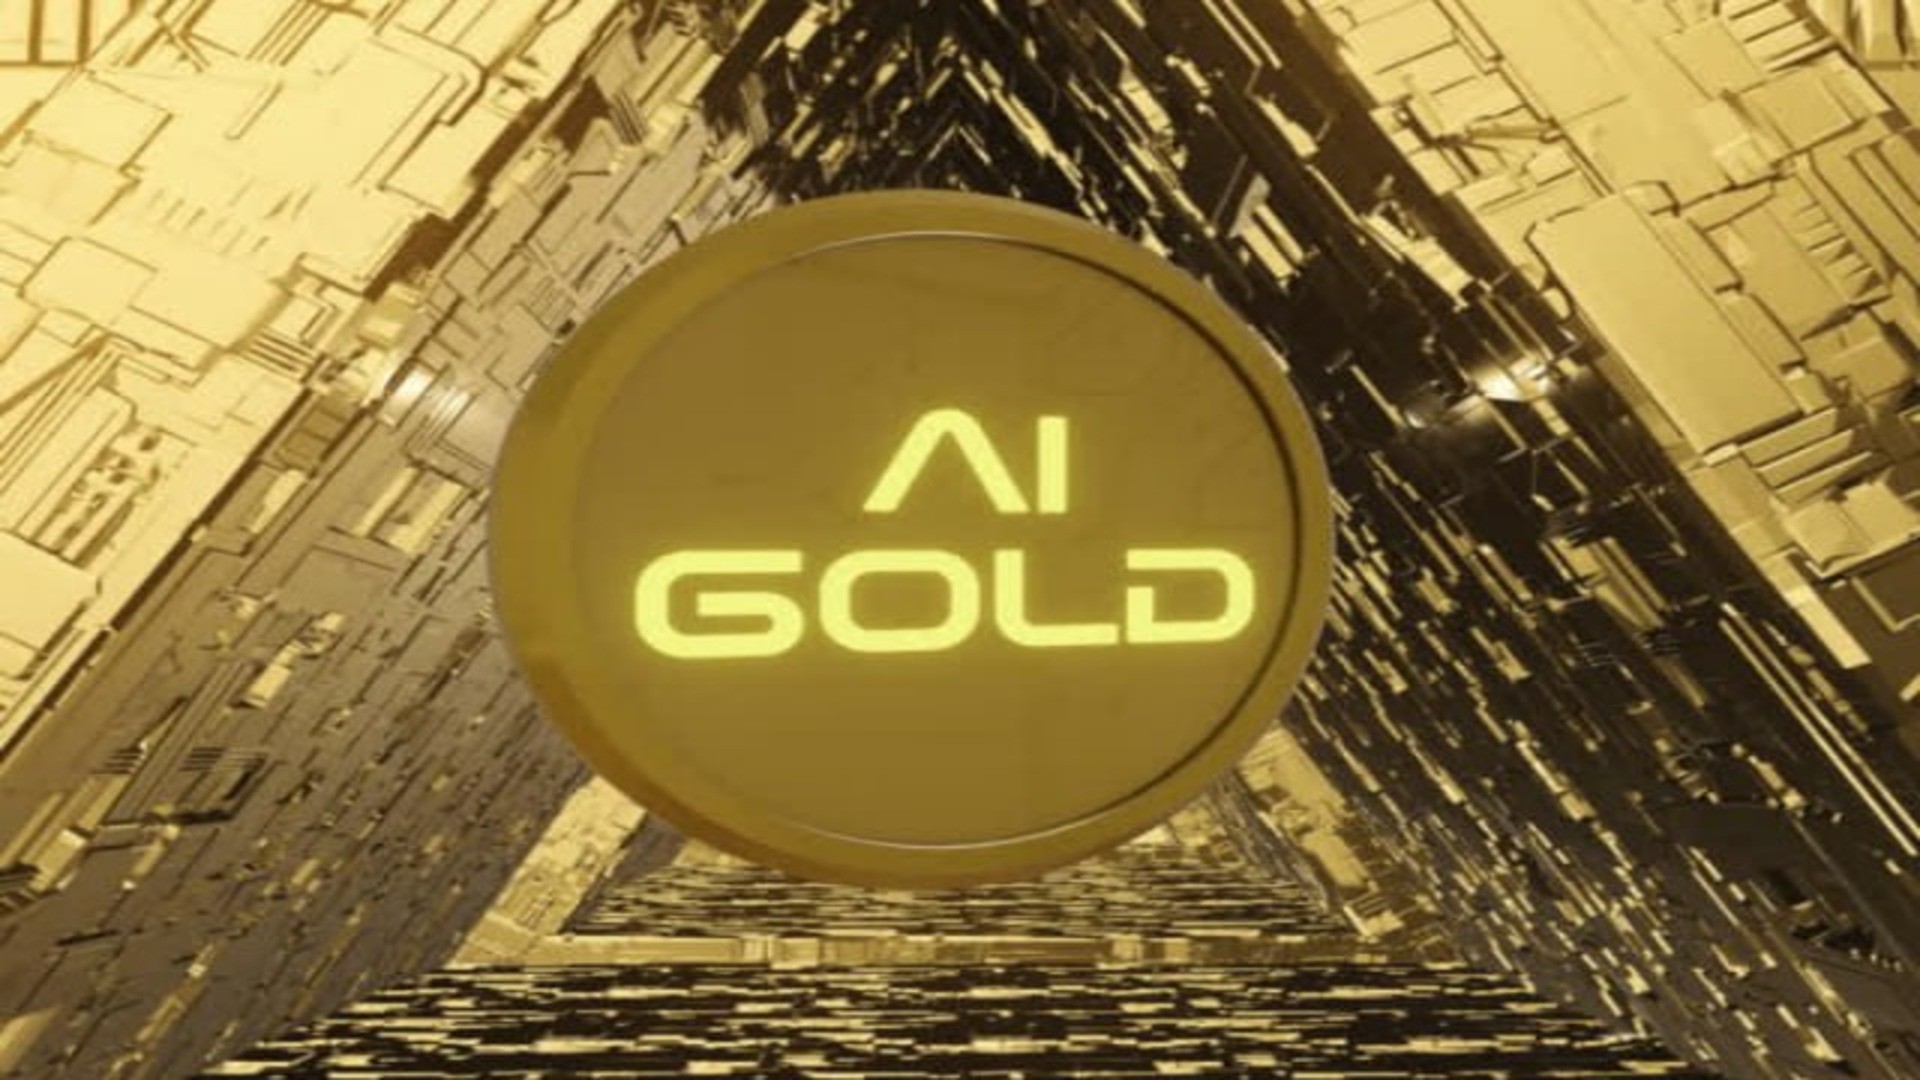 AIGOLD: A Comparison with Other Digital Gold Projects